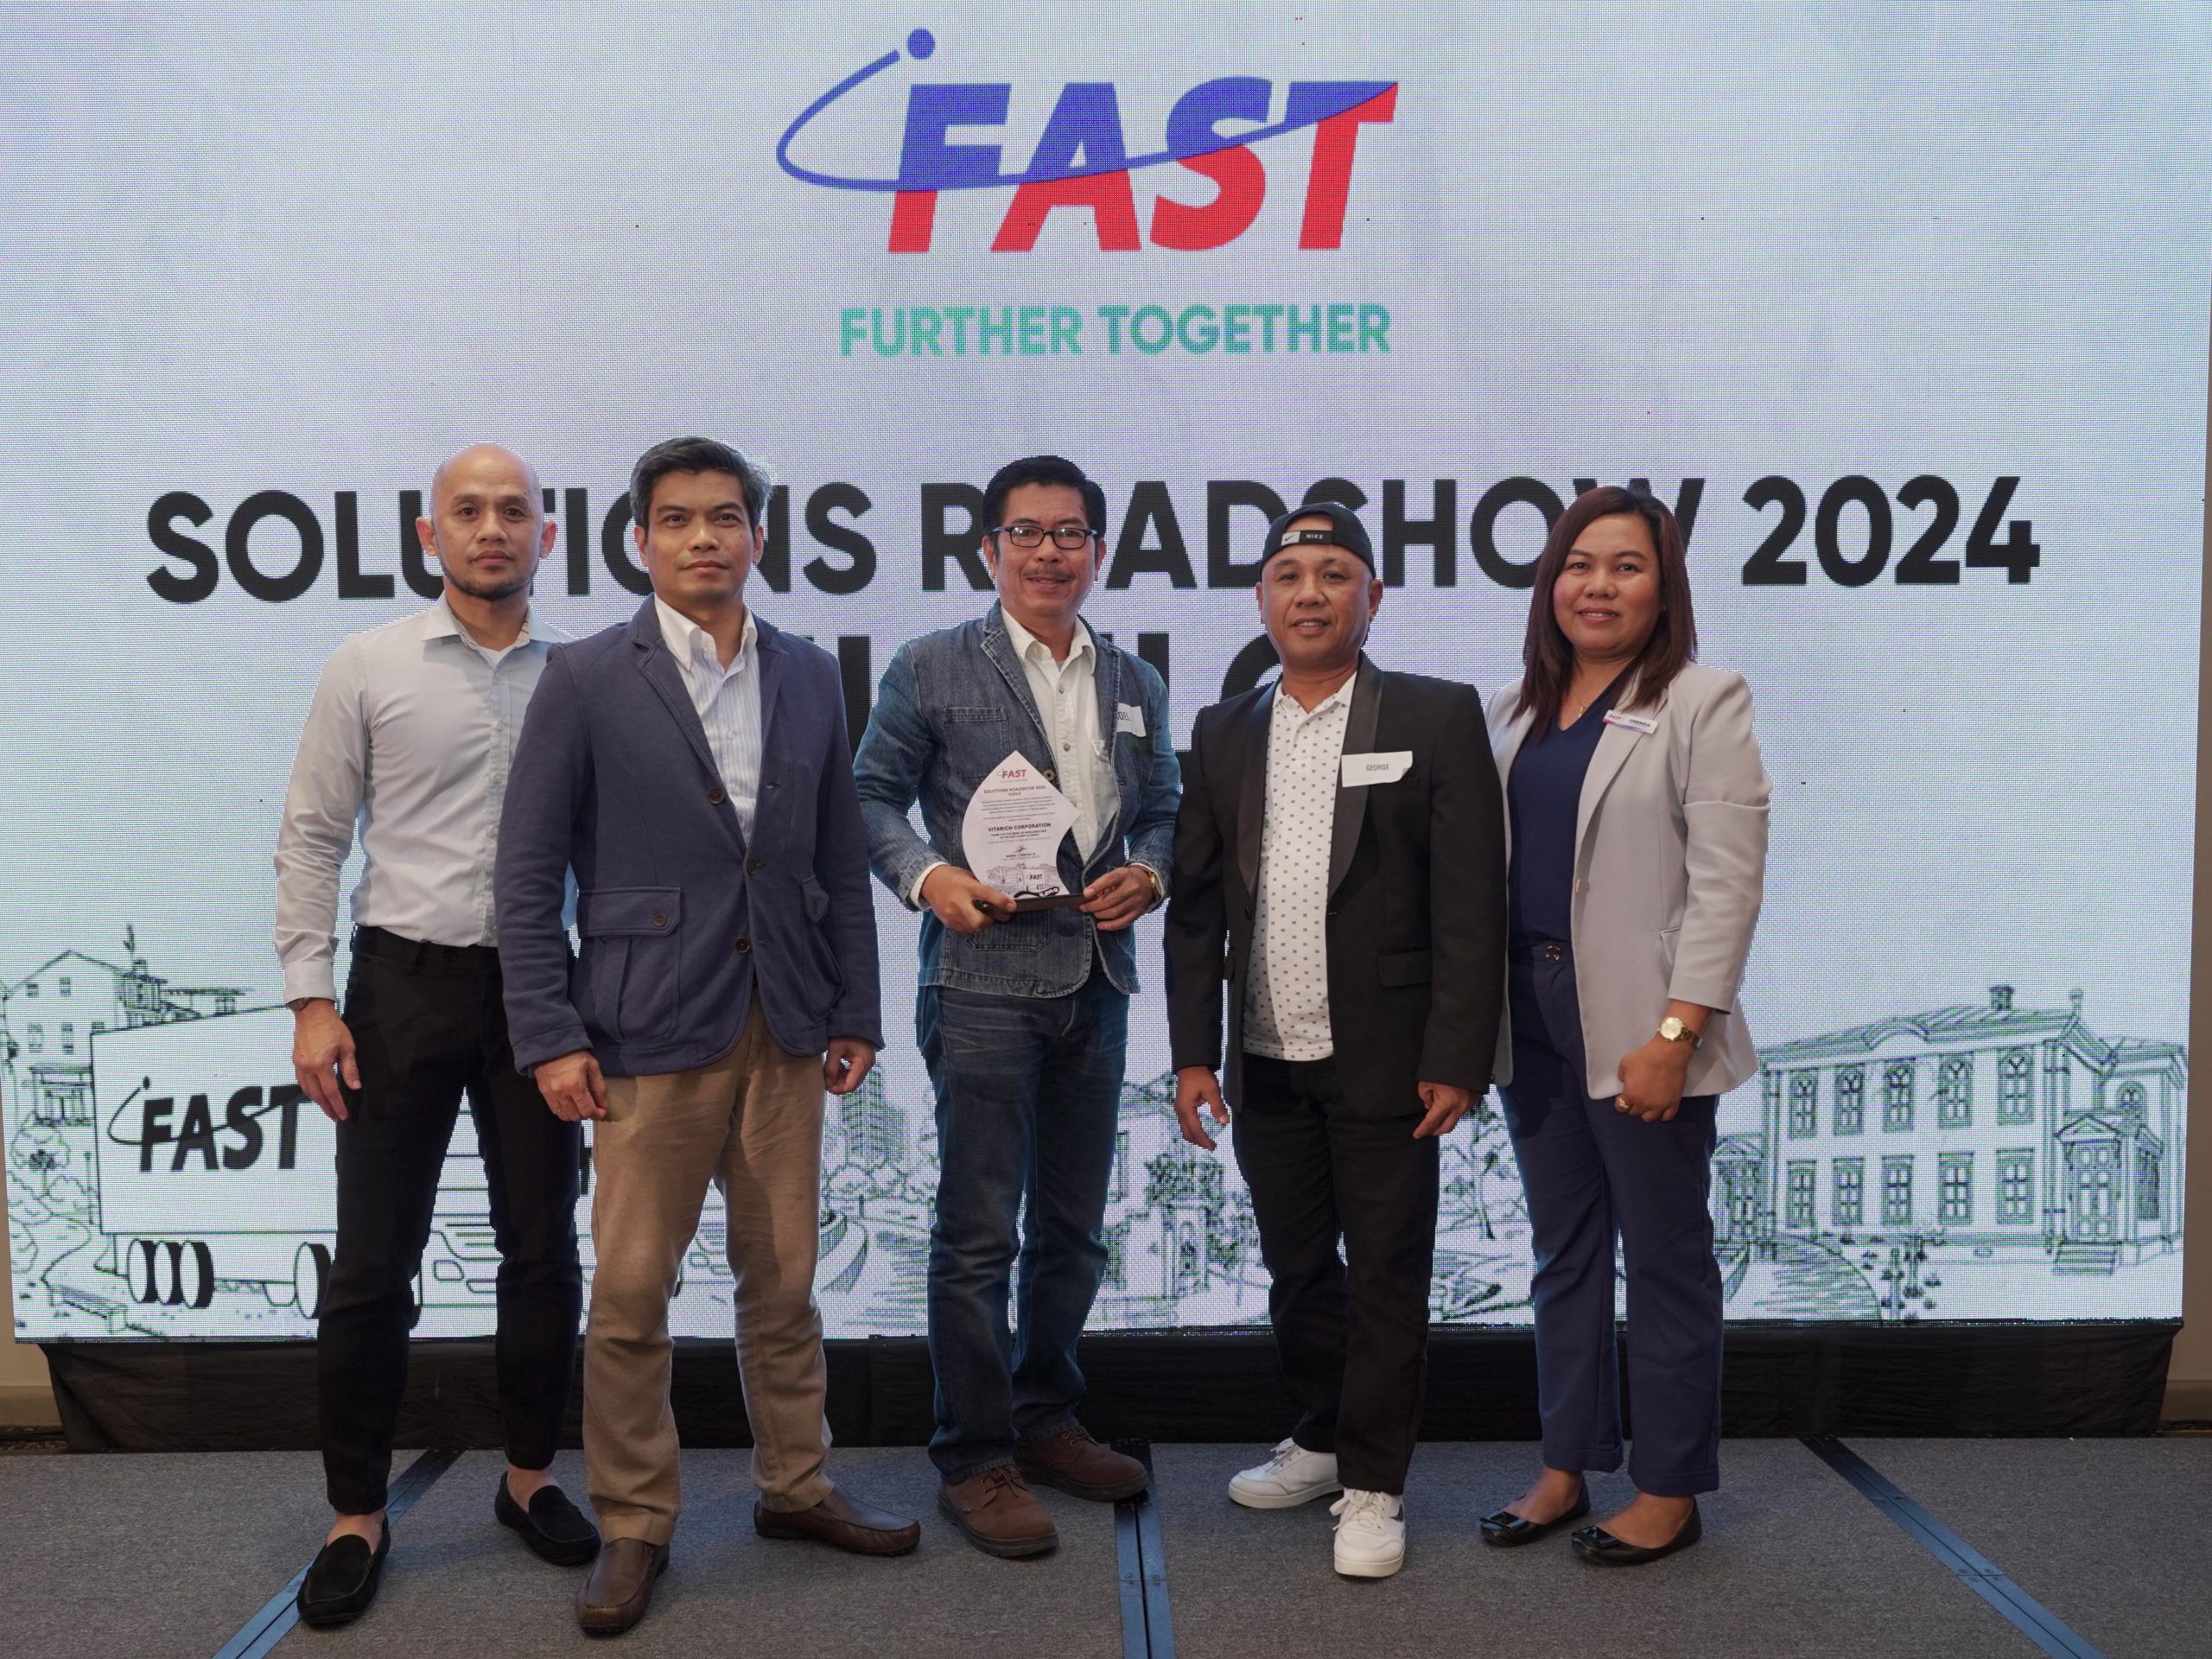 FAST Logistics Group, the leader in end-to-end logistics in the Philippines, has launched its Solutions Roadshow in Iloilo City, the inaugural leg of a series to be conducted across the Visayas and Mindanao, to drive innovation forward and bring topnotch services directly to the doorsteps of growing enterprises in Visayas and Mindanao.